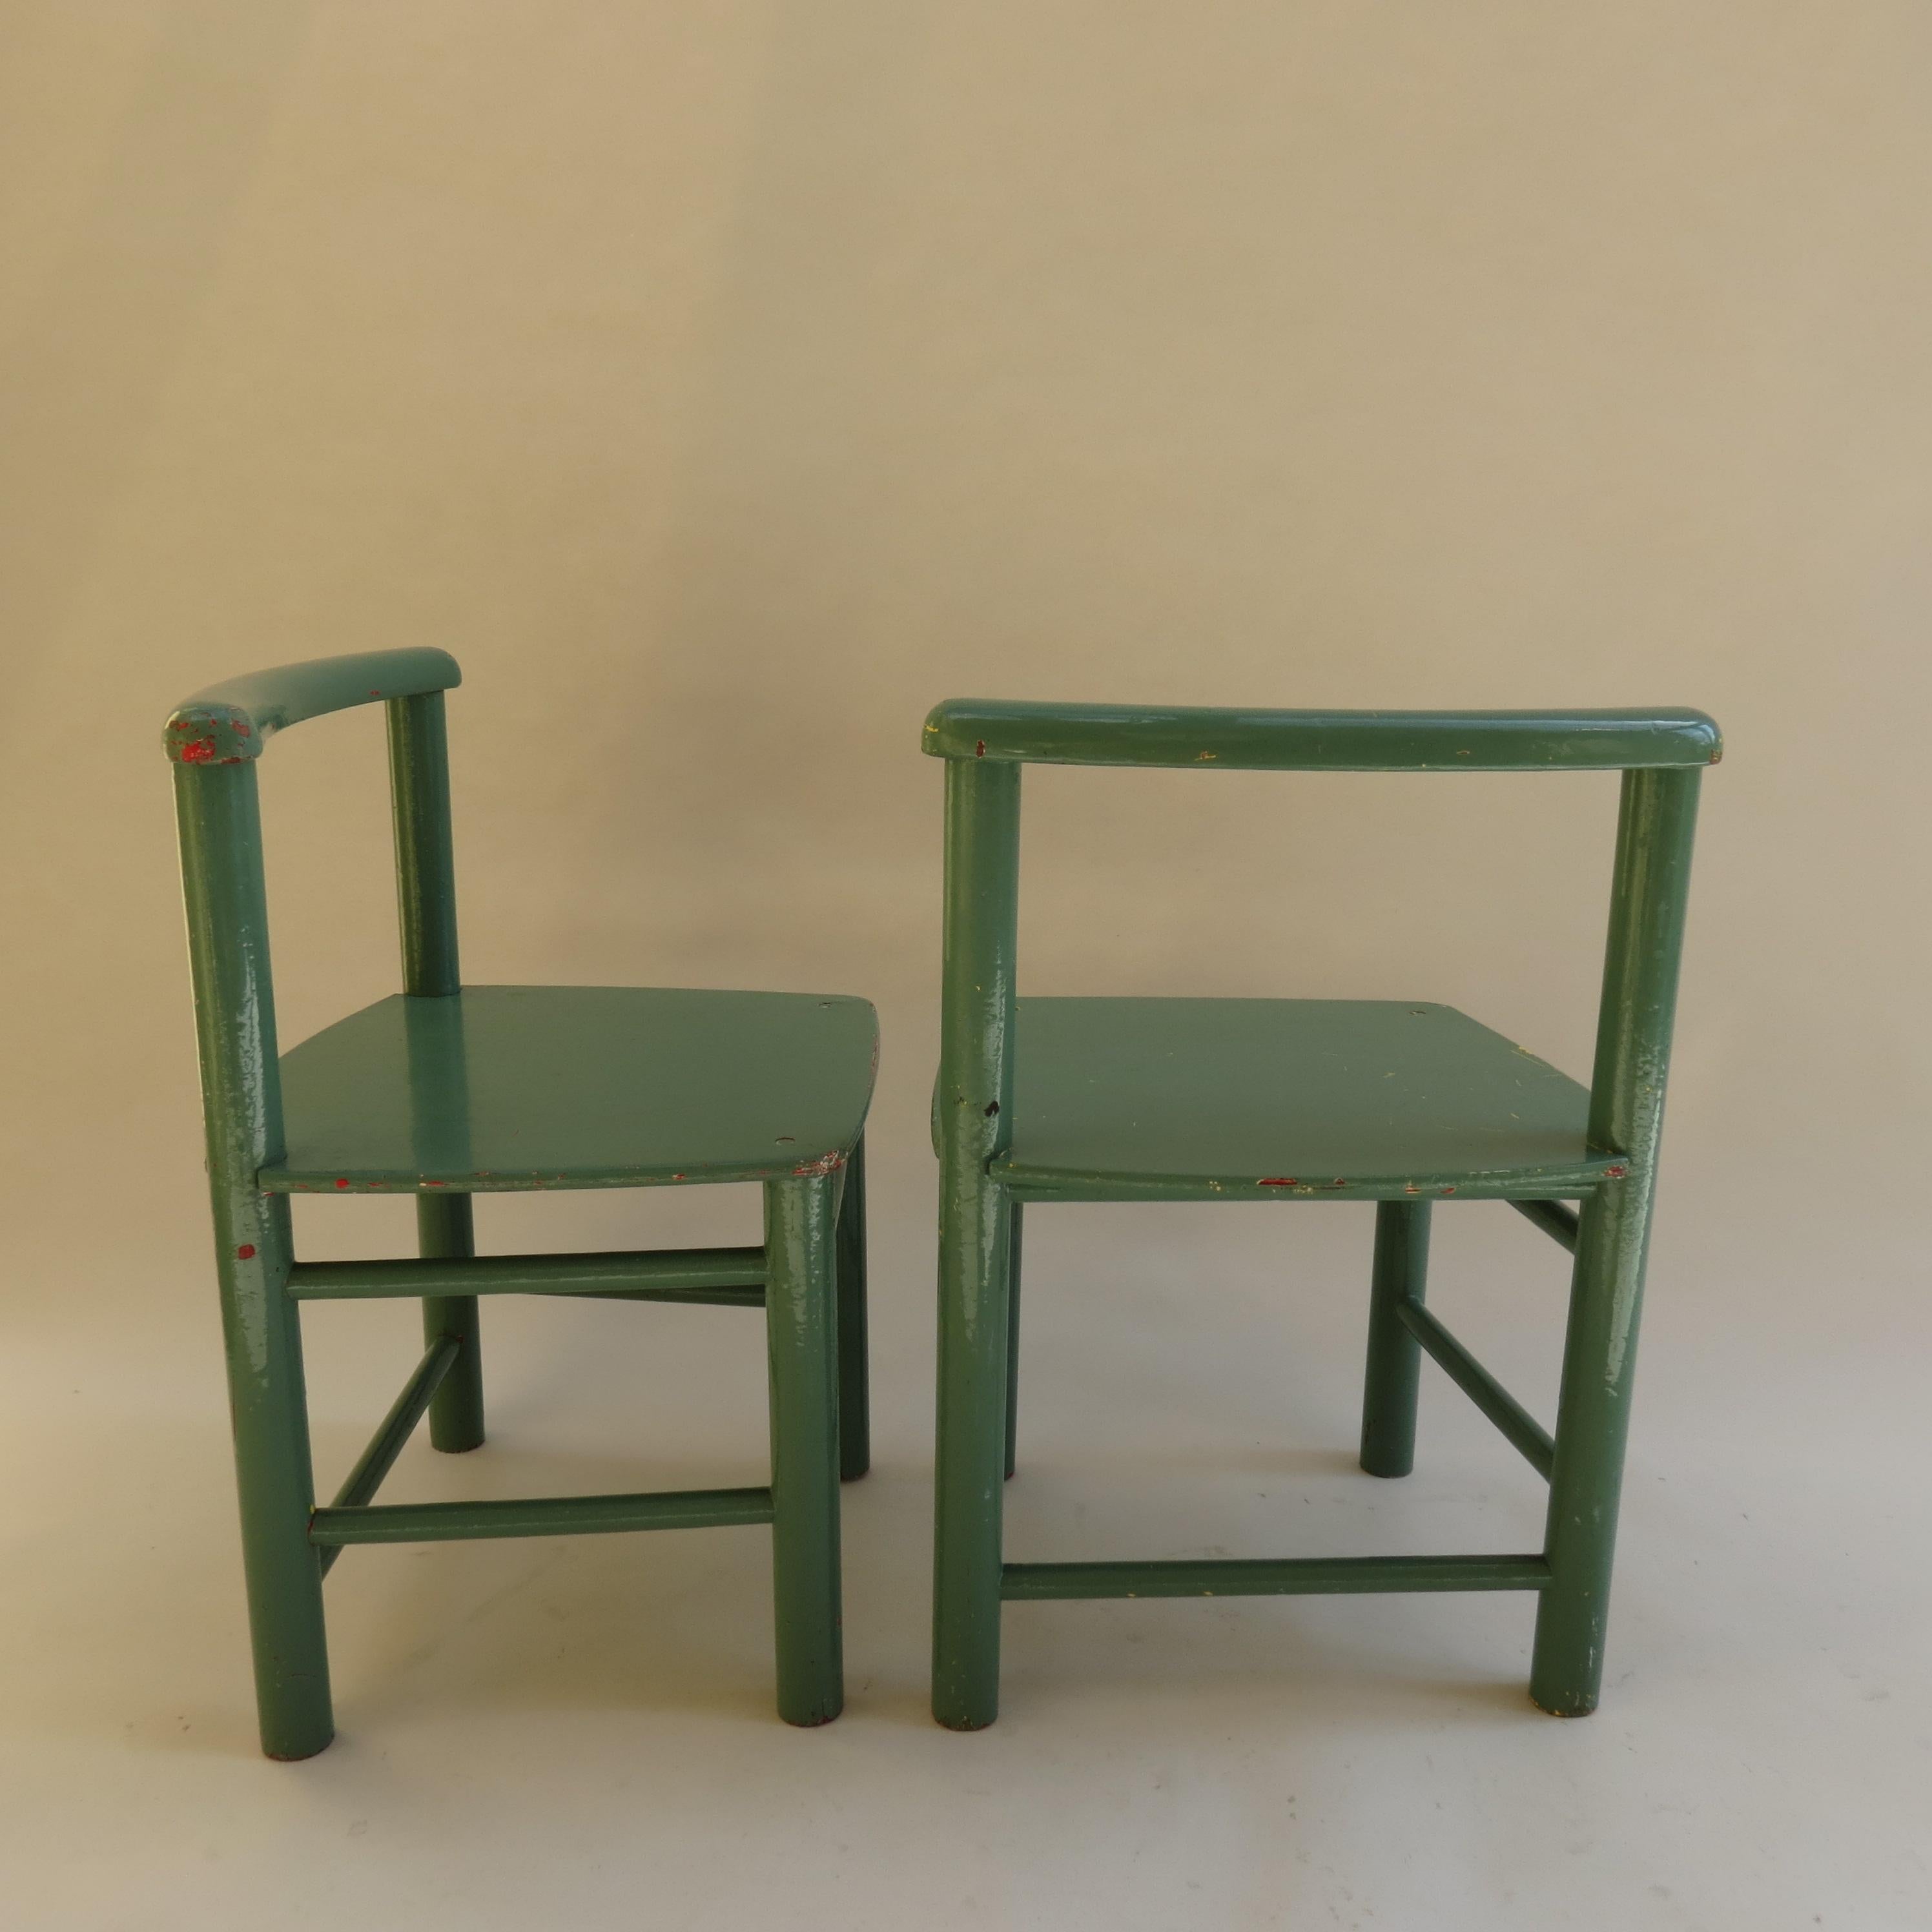 Pair of Scandinavian Childs Chairs in Green from the 1960s 2